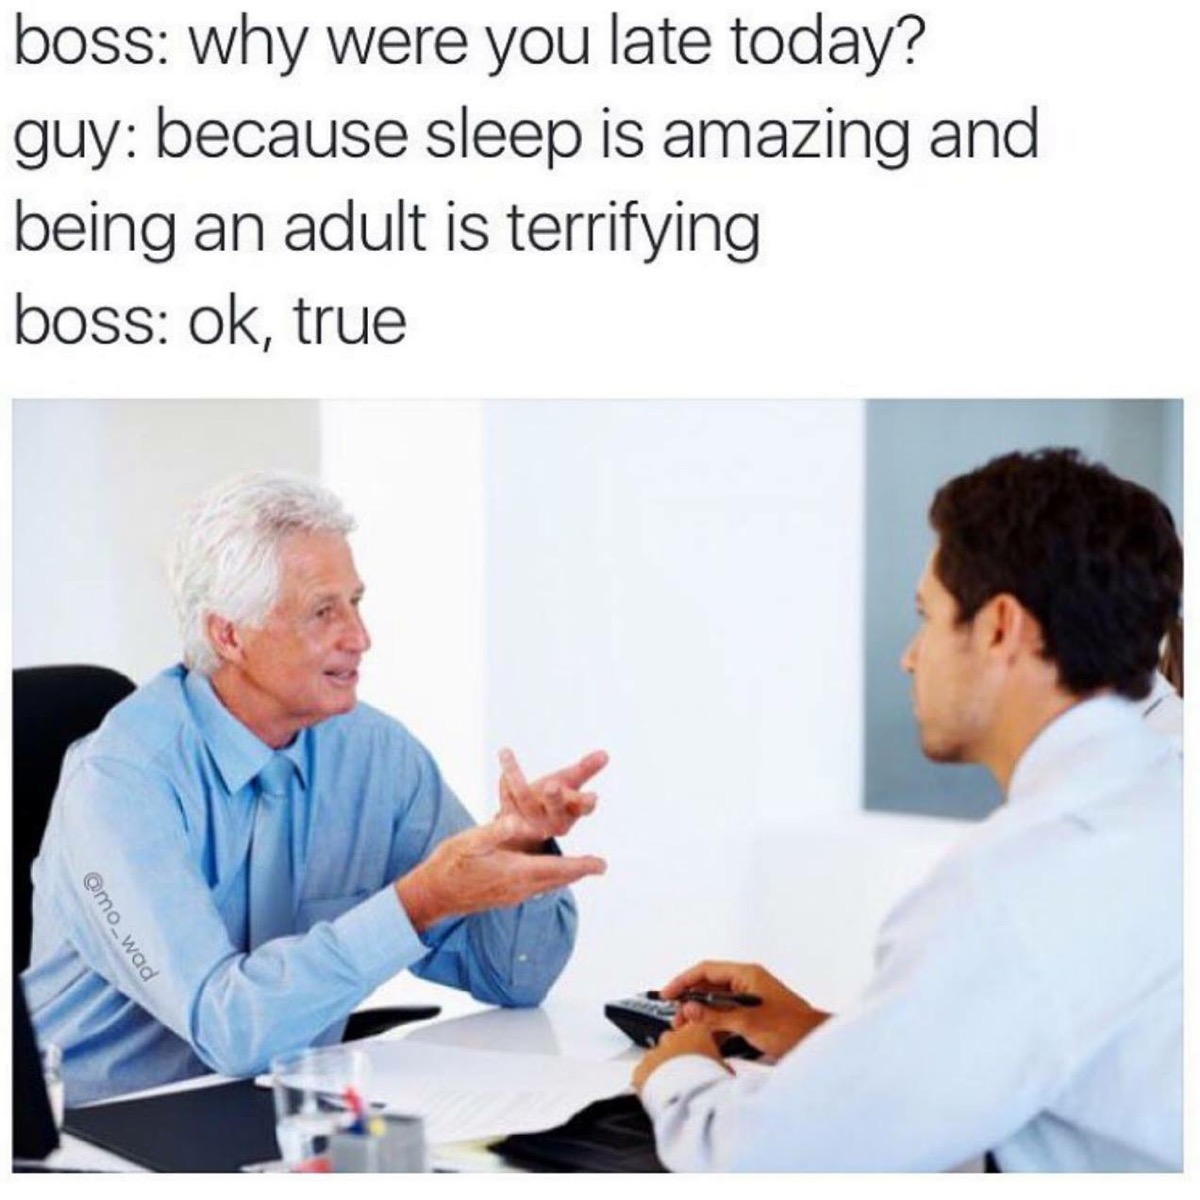 boss why were you late today? guy because sleep is amazing and being an adult is terrifying boss ok, true